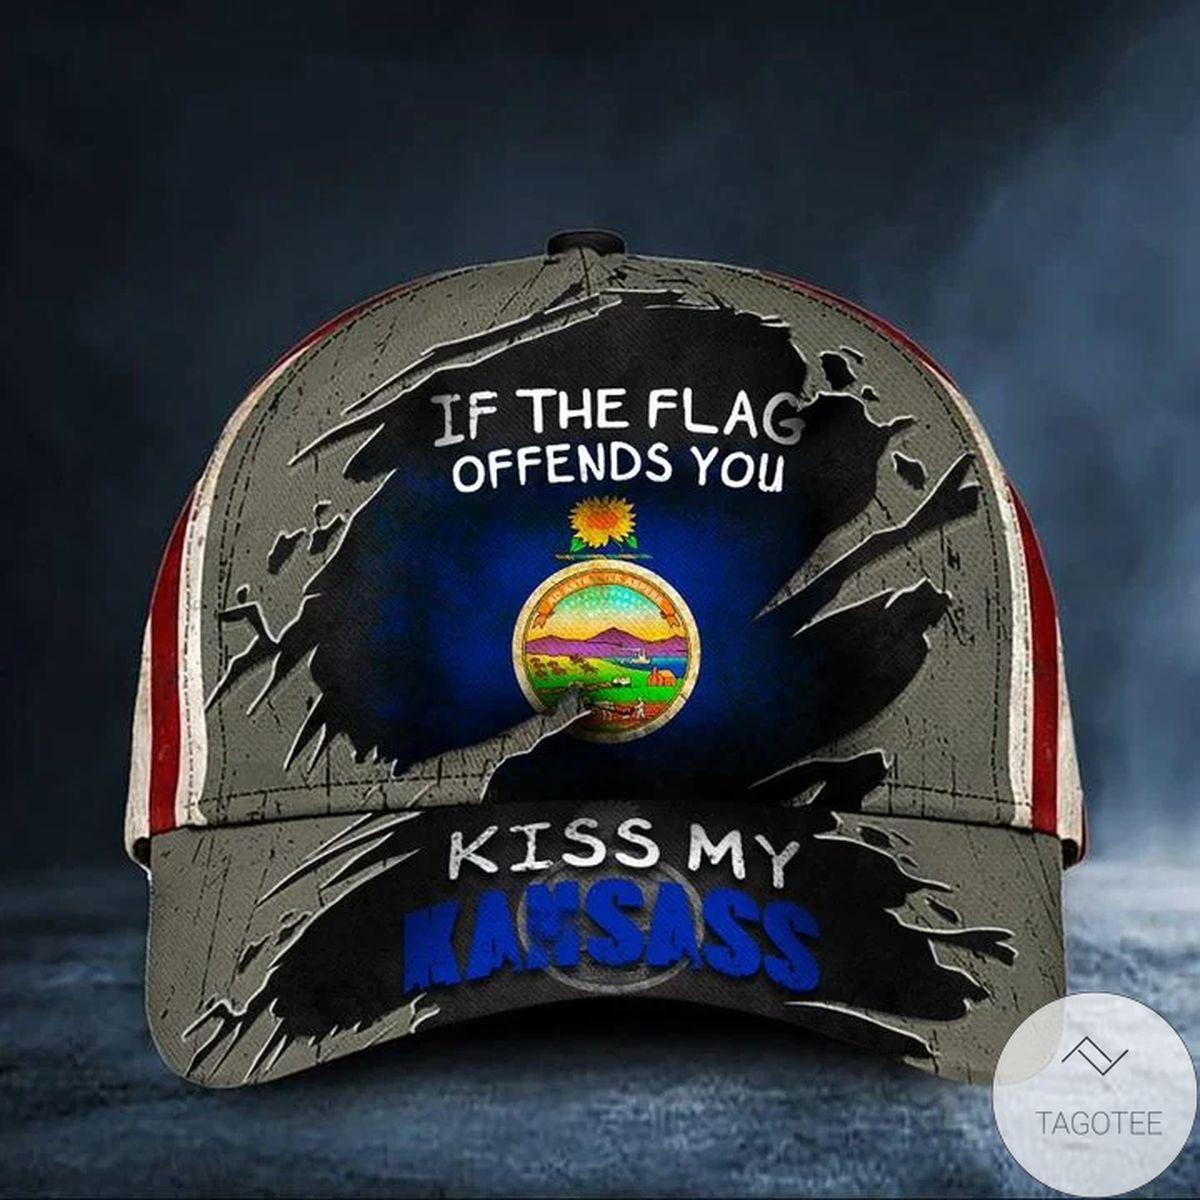 If The Flag Offends You Kiss My Kansasass Cap USA Flag Vintage Hat Mens M K State Merch